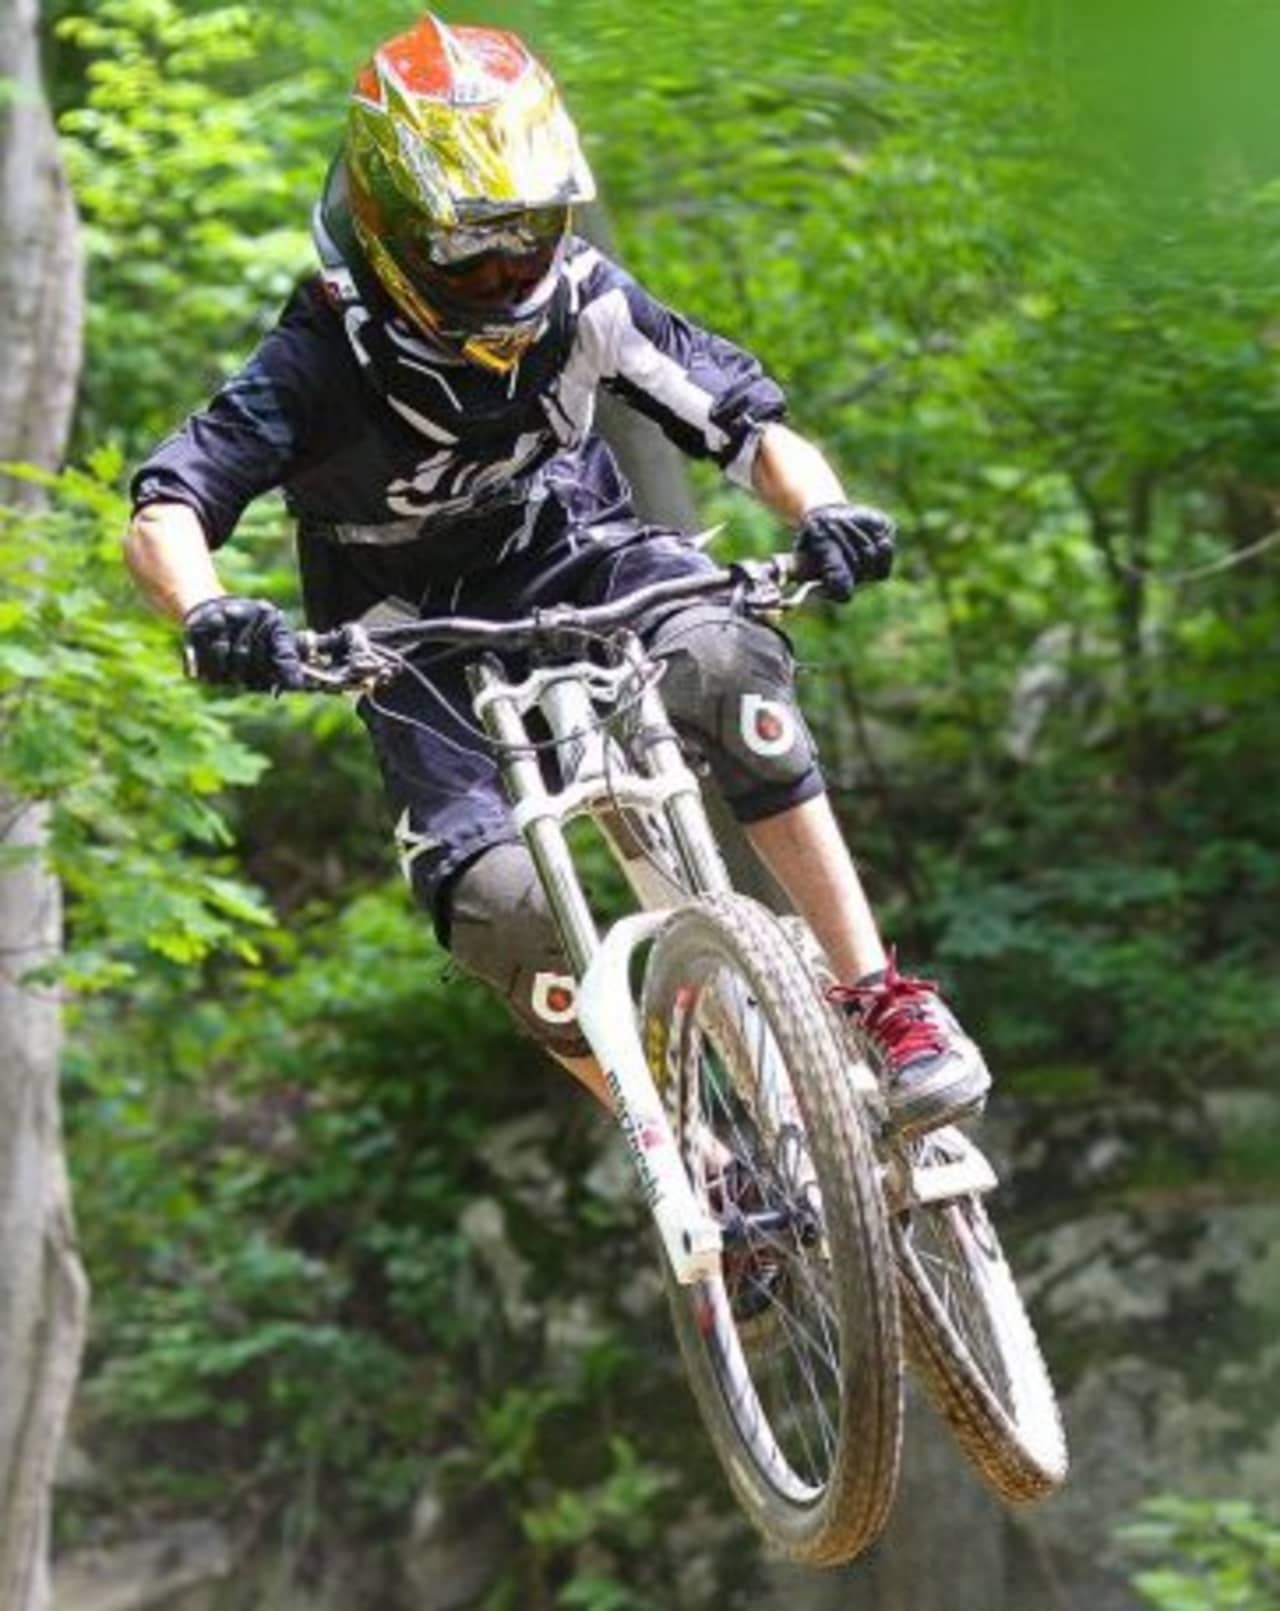 The New Jersey Department of Environmental Protection is seeking bids to help turn the former Jungle Habitat site in West Milford into a park for mountain bikers.